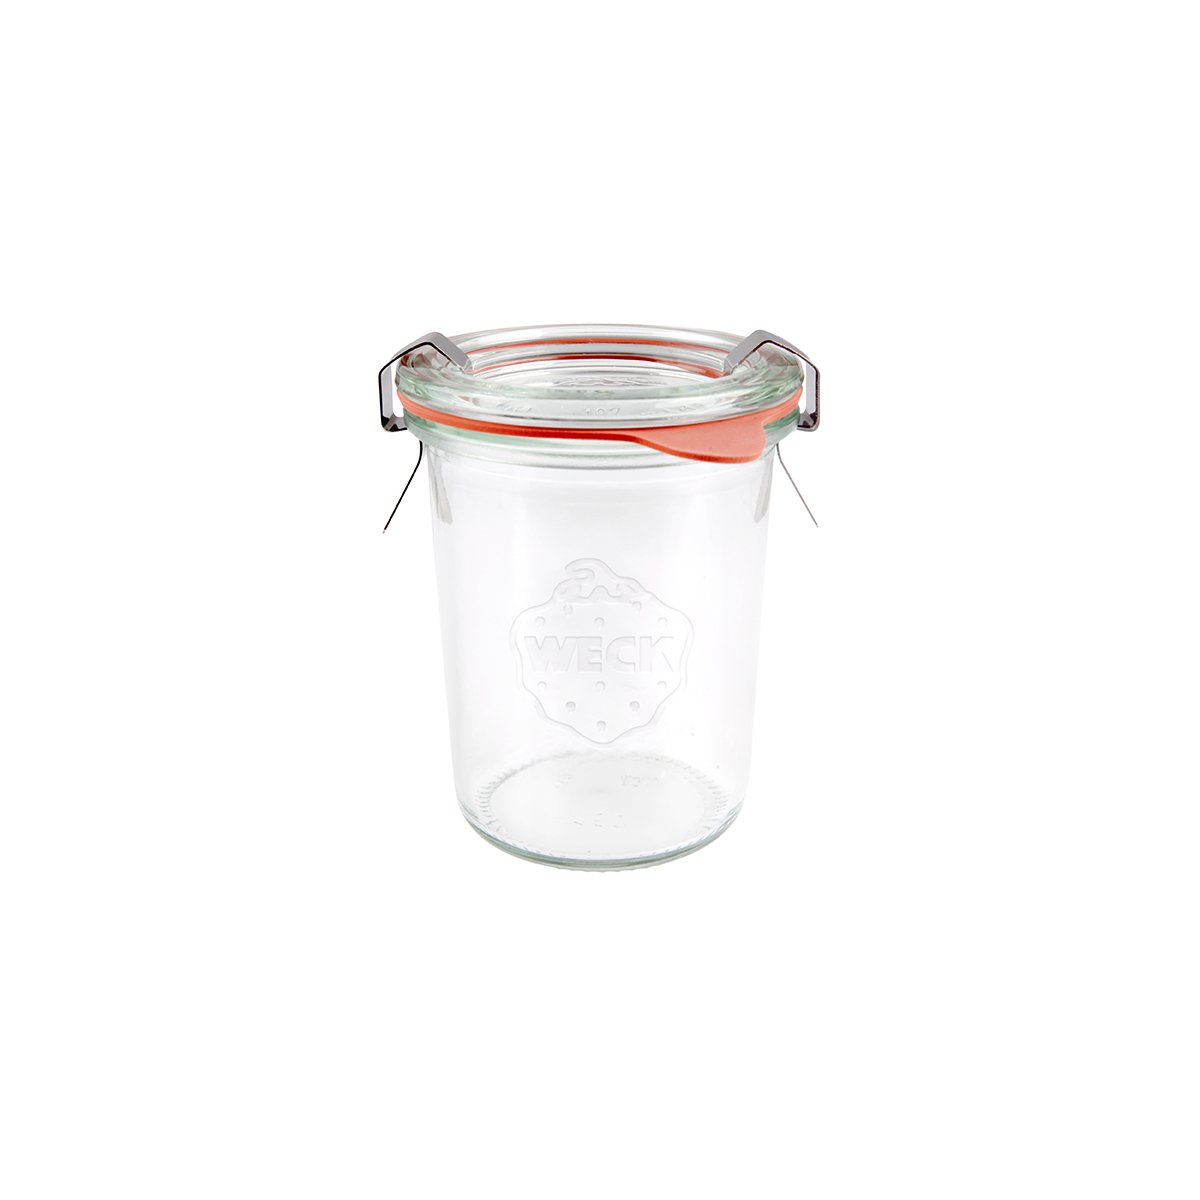 9982314 Weck Complete Glass Jar with Lid & Seal 60x80mm / 160ml Tomkin Australia Hospitality Supplies